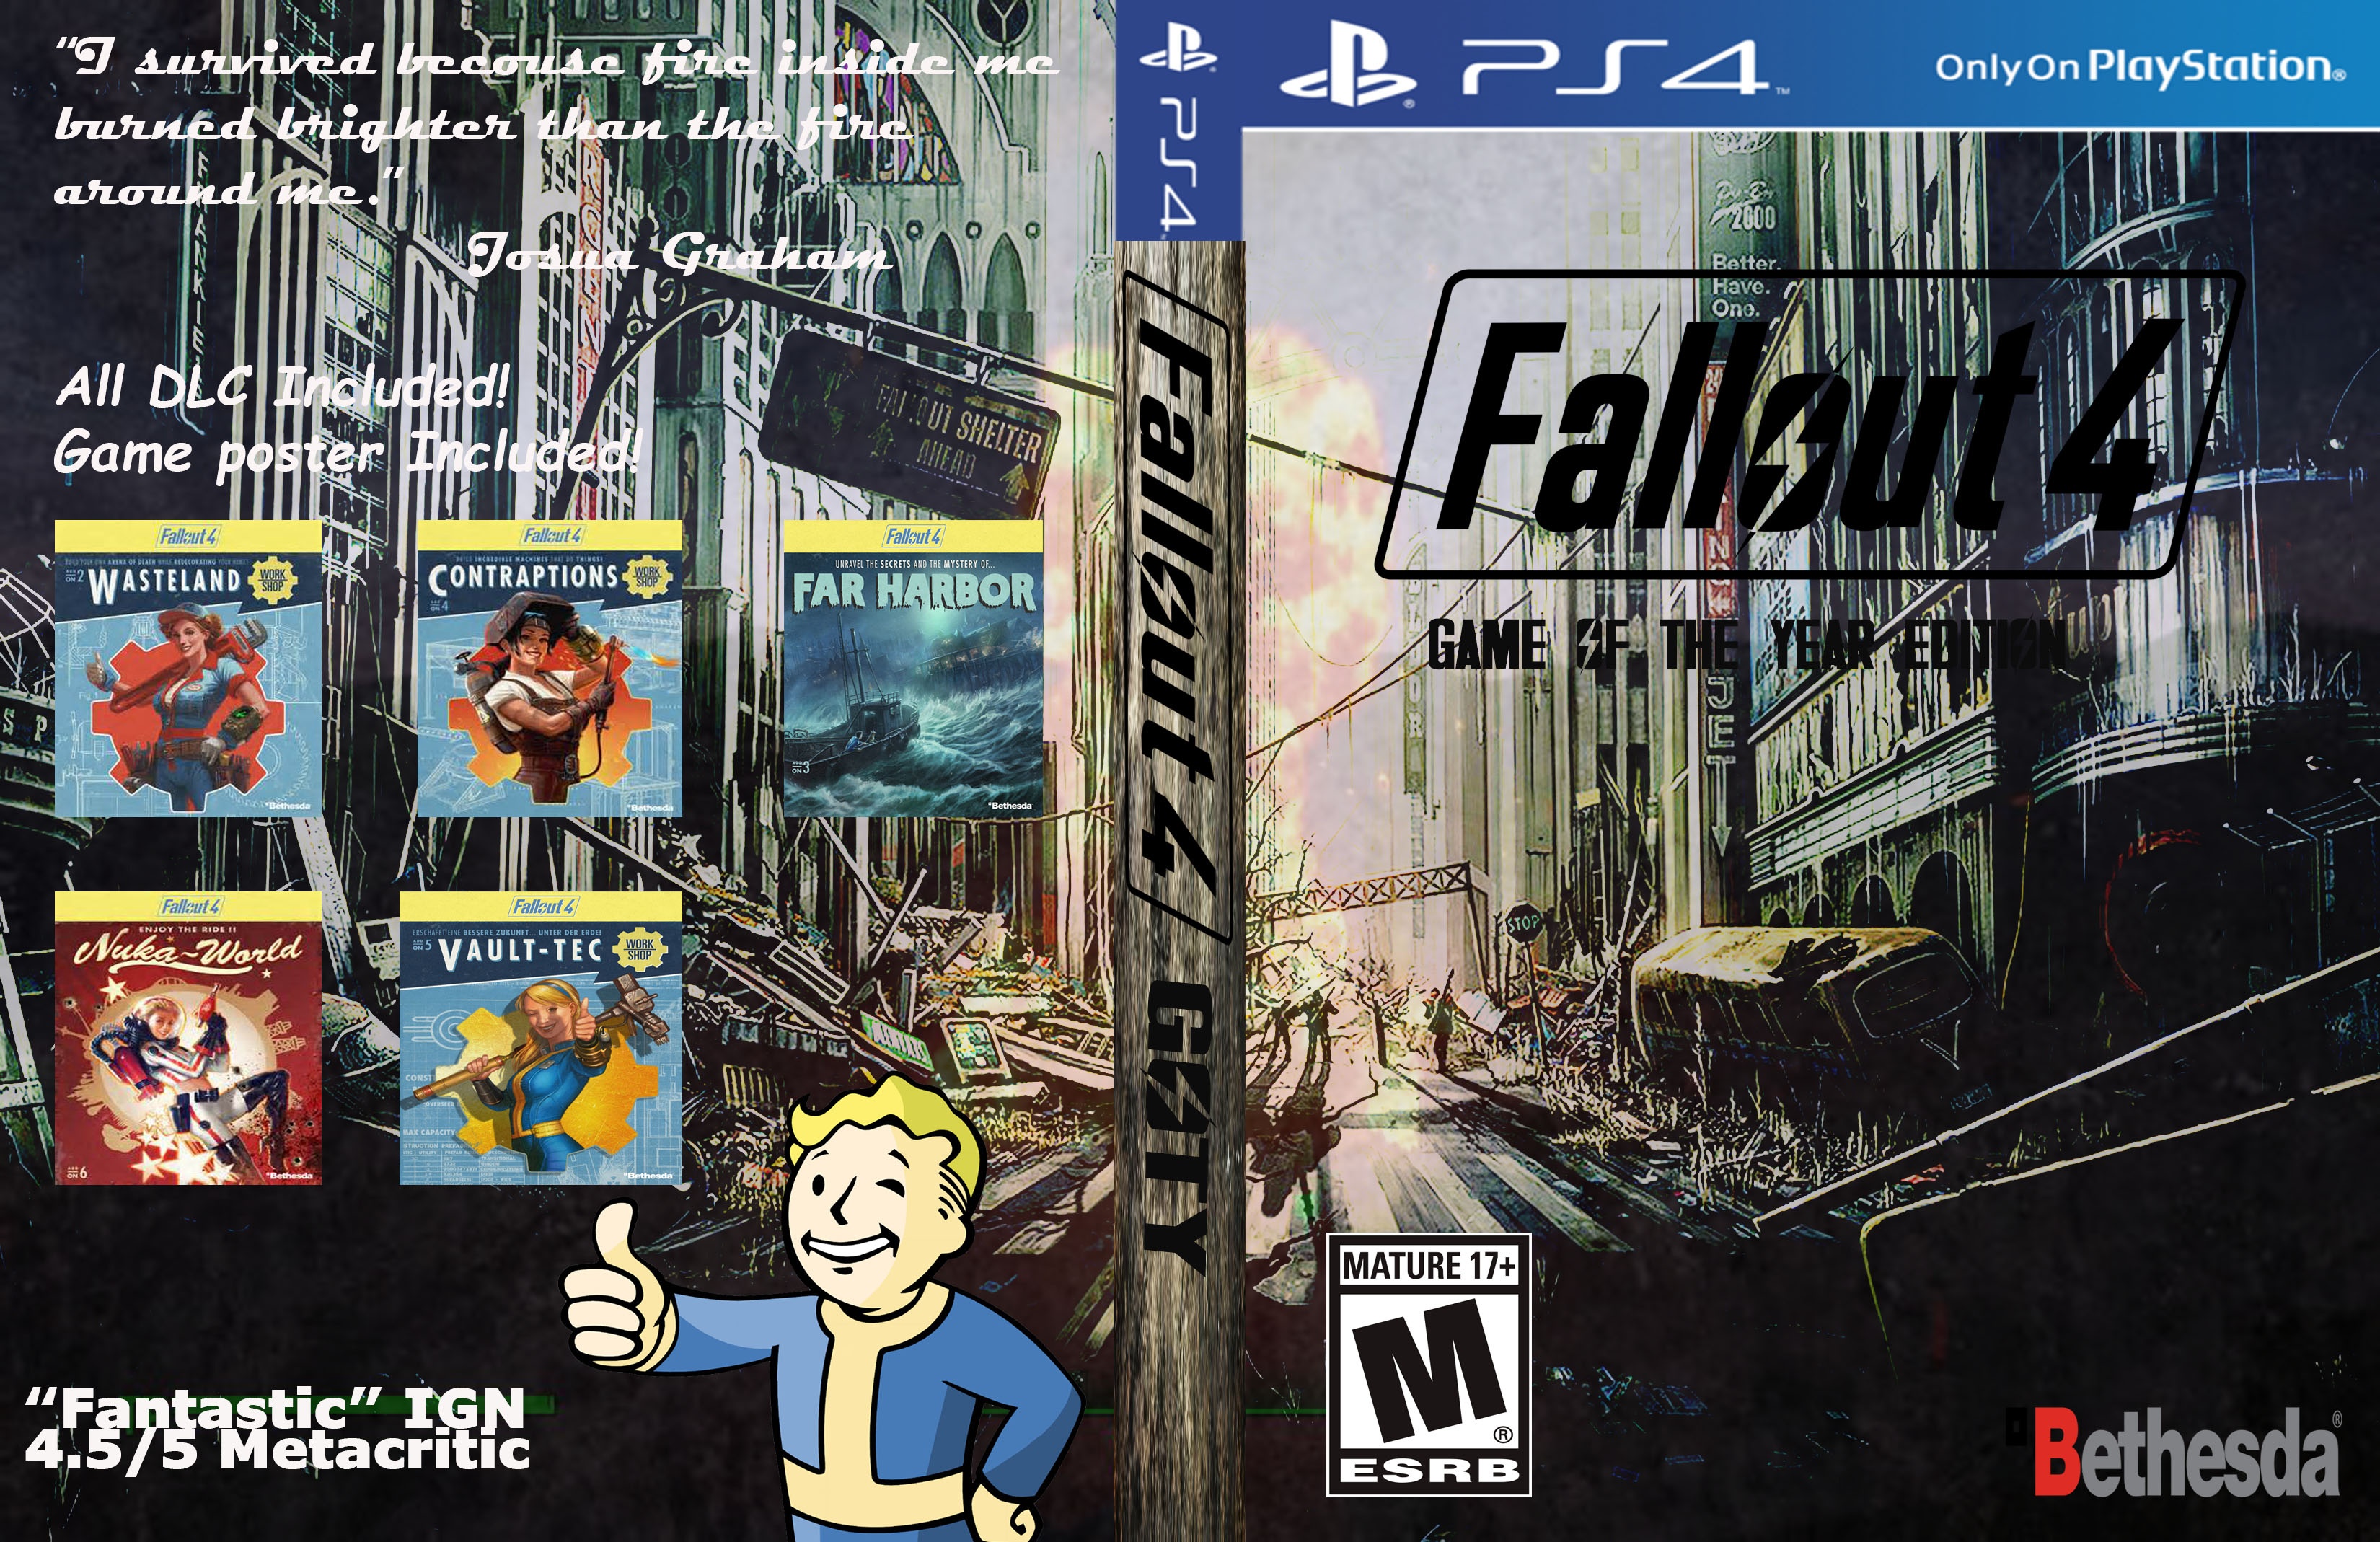 Fallout 4 GOTY box cover